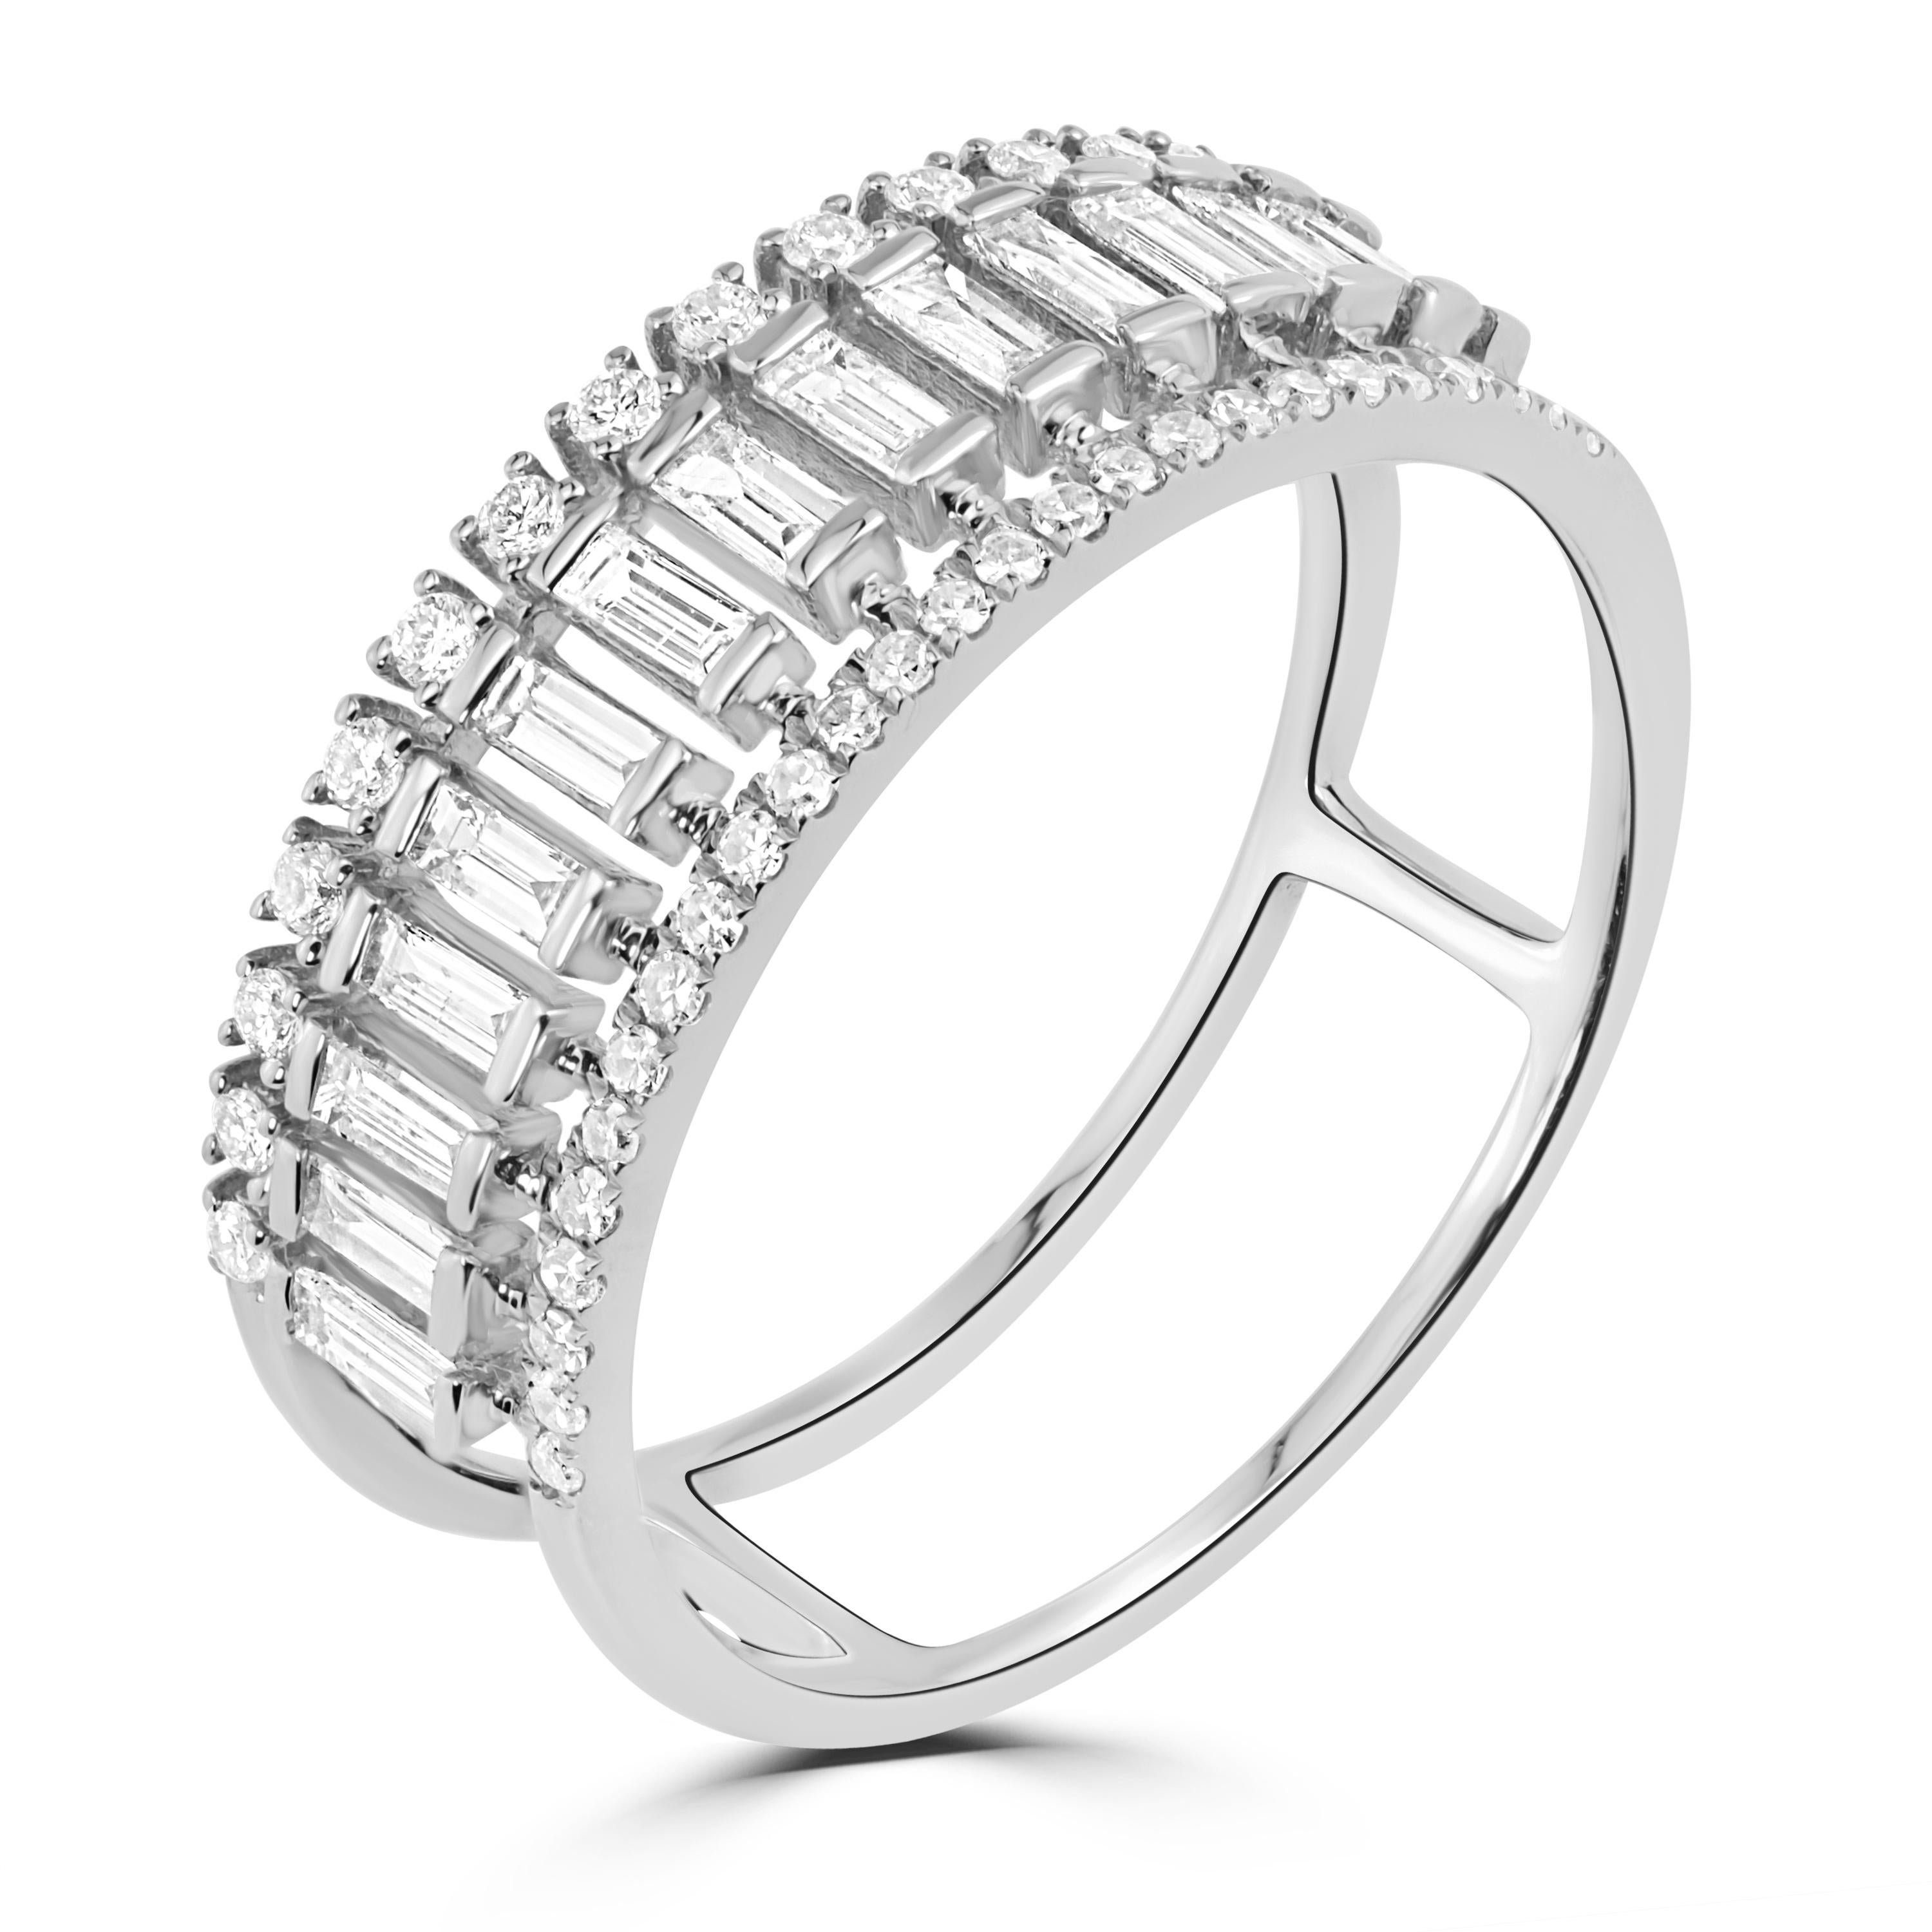 Rows of extravagant shimmer and style. This Luxle Baguette and Round Diamond Band Ring are crafted in 18K white gold for women sparkle with 15 baguette diamonds and 41 round diamonds totaling 0.56 Cts. This white gold ring is showcased with